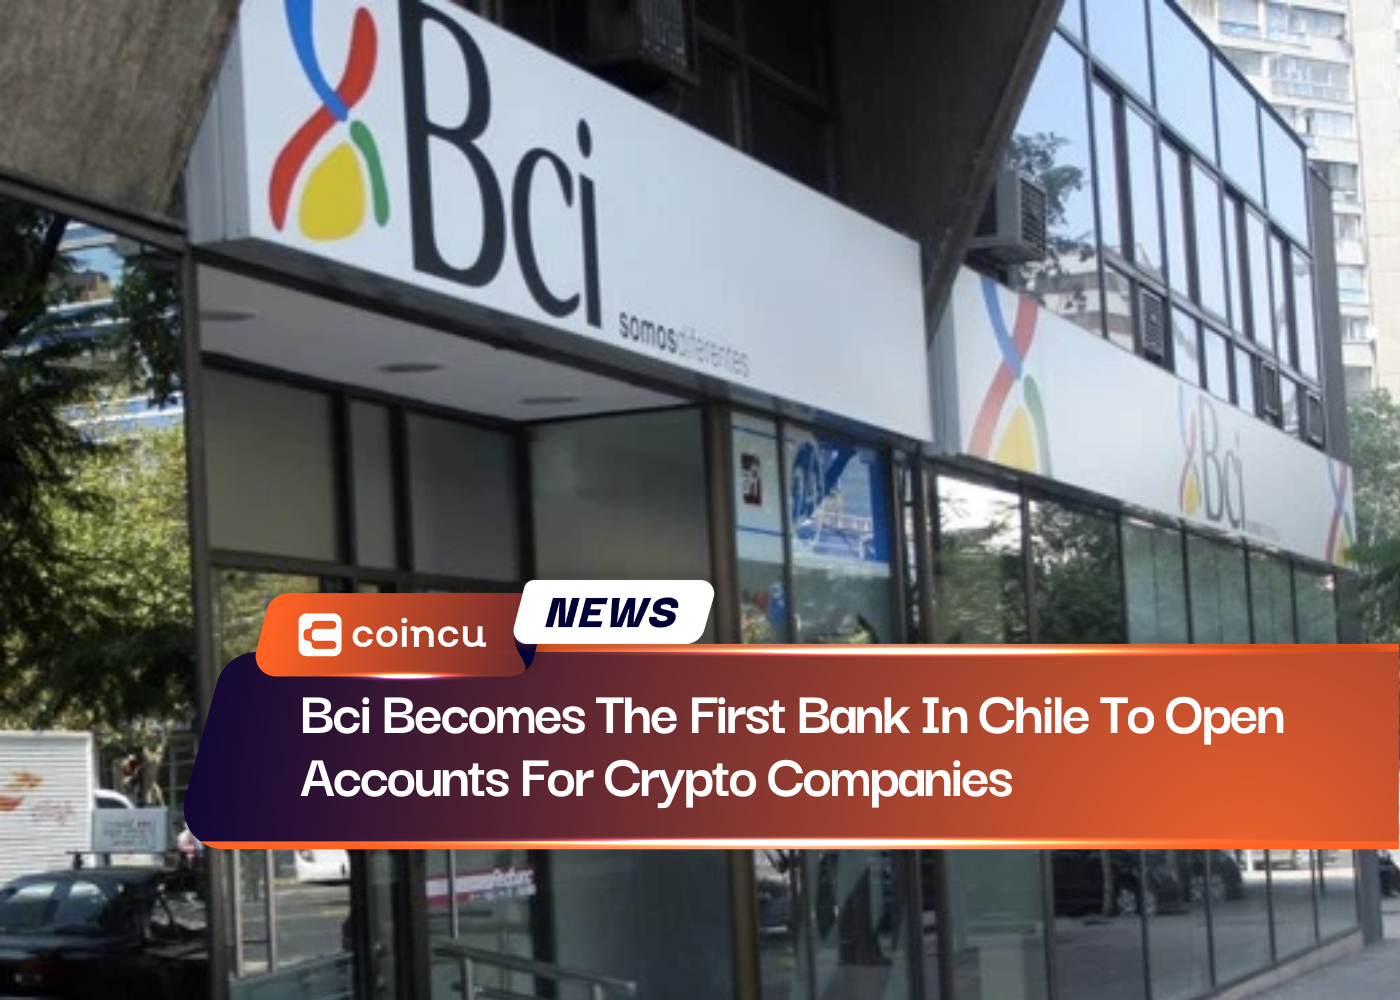 Bci Becomes The First Bank In Chile To Open Accounts For Crypto Companies